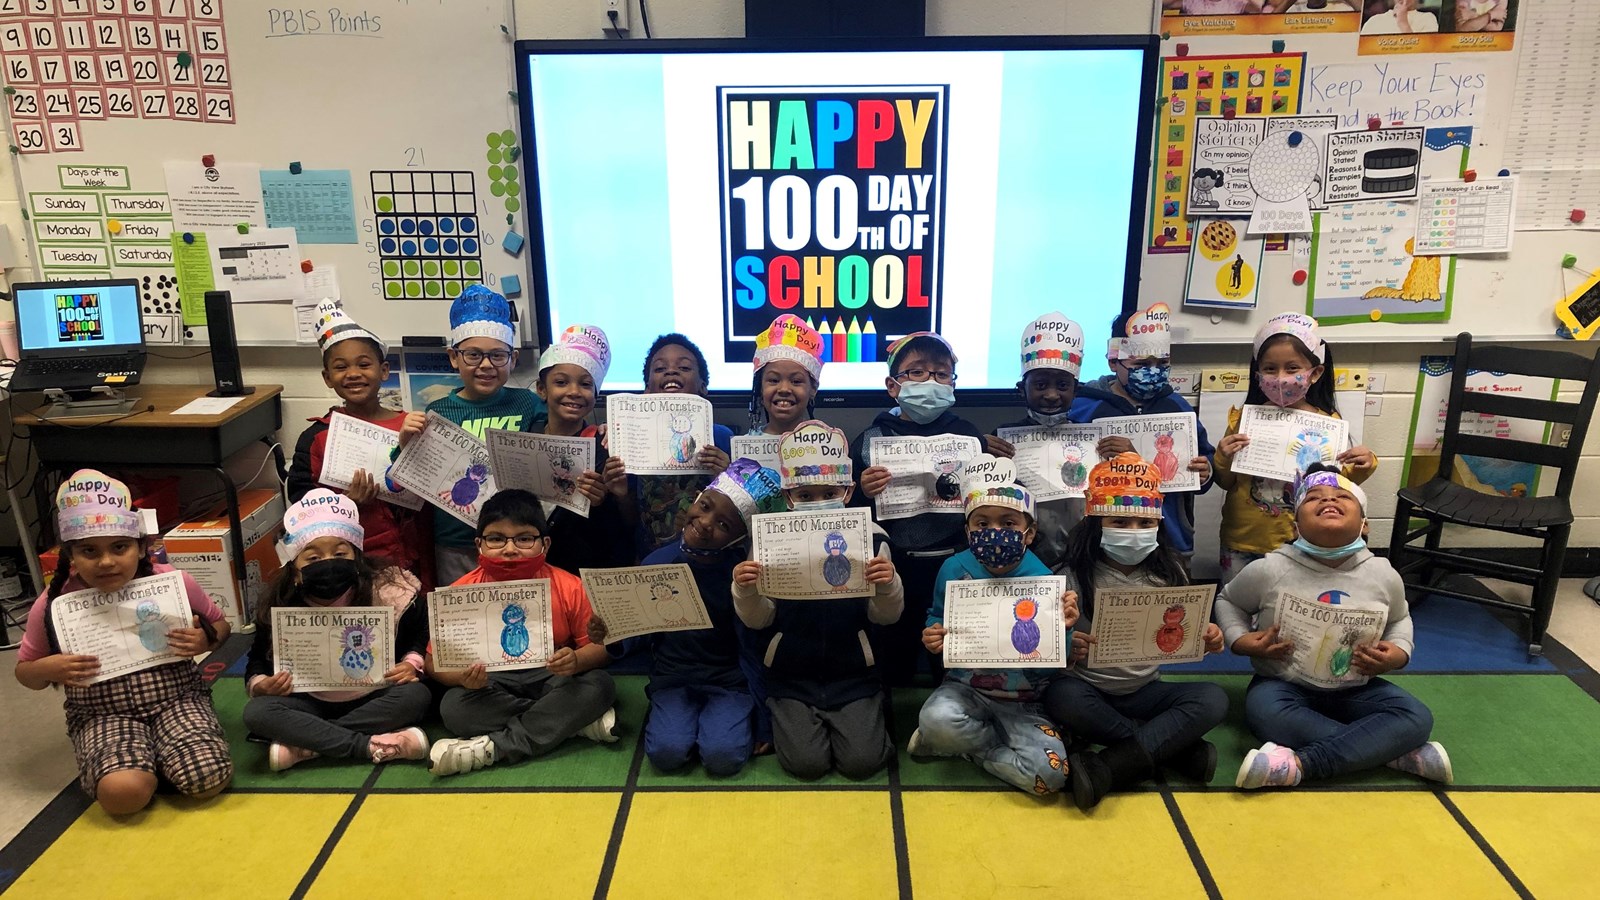 Happy 100th Day of Learning at City View Elementary School